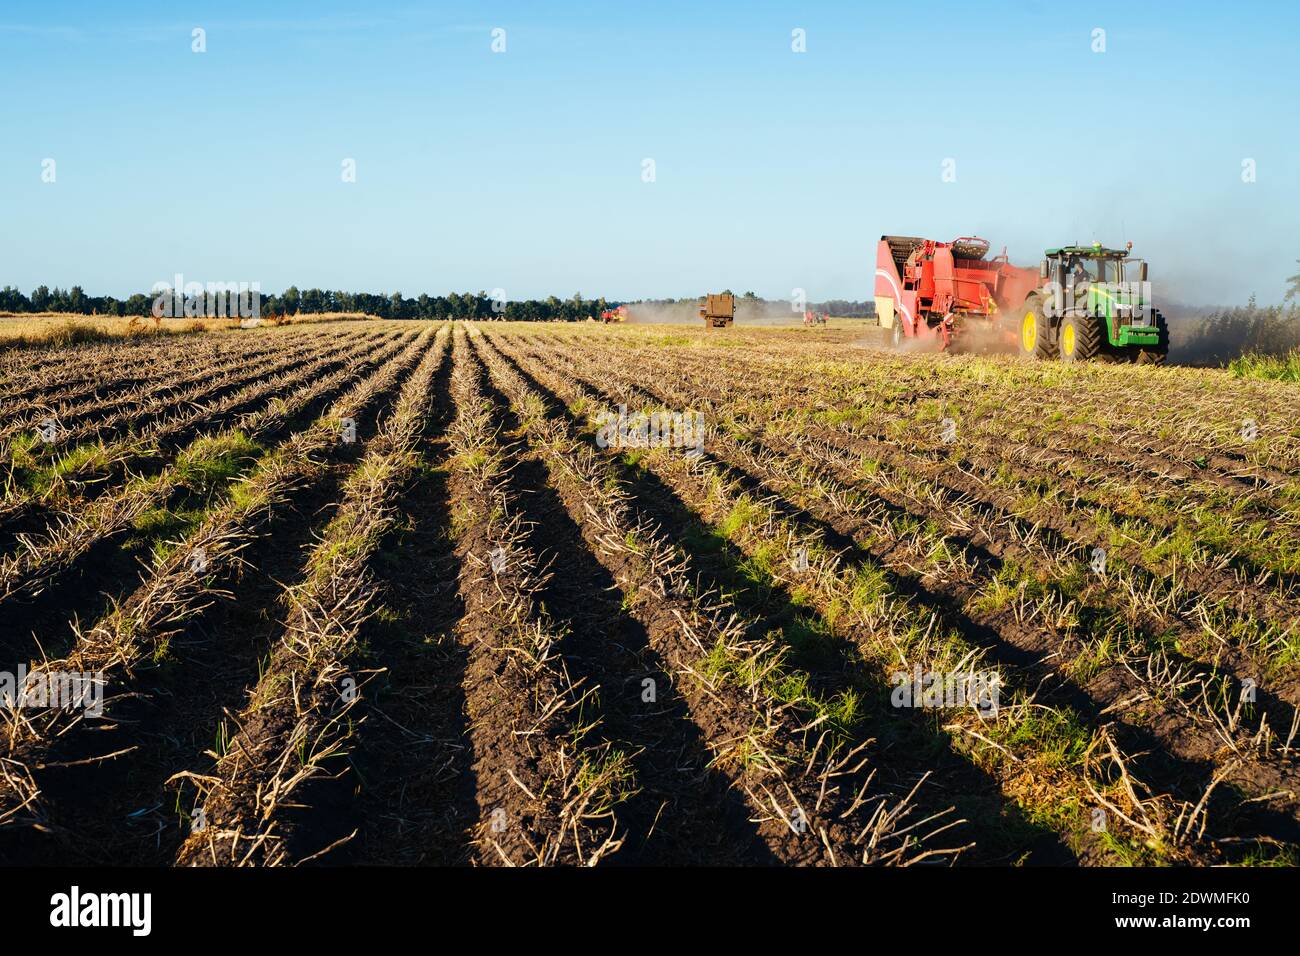 The tractor is harvesting potatoes in the field. Agricultural industry image Stock Photo